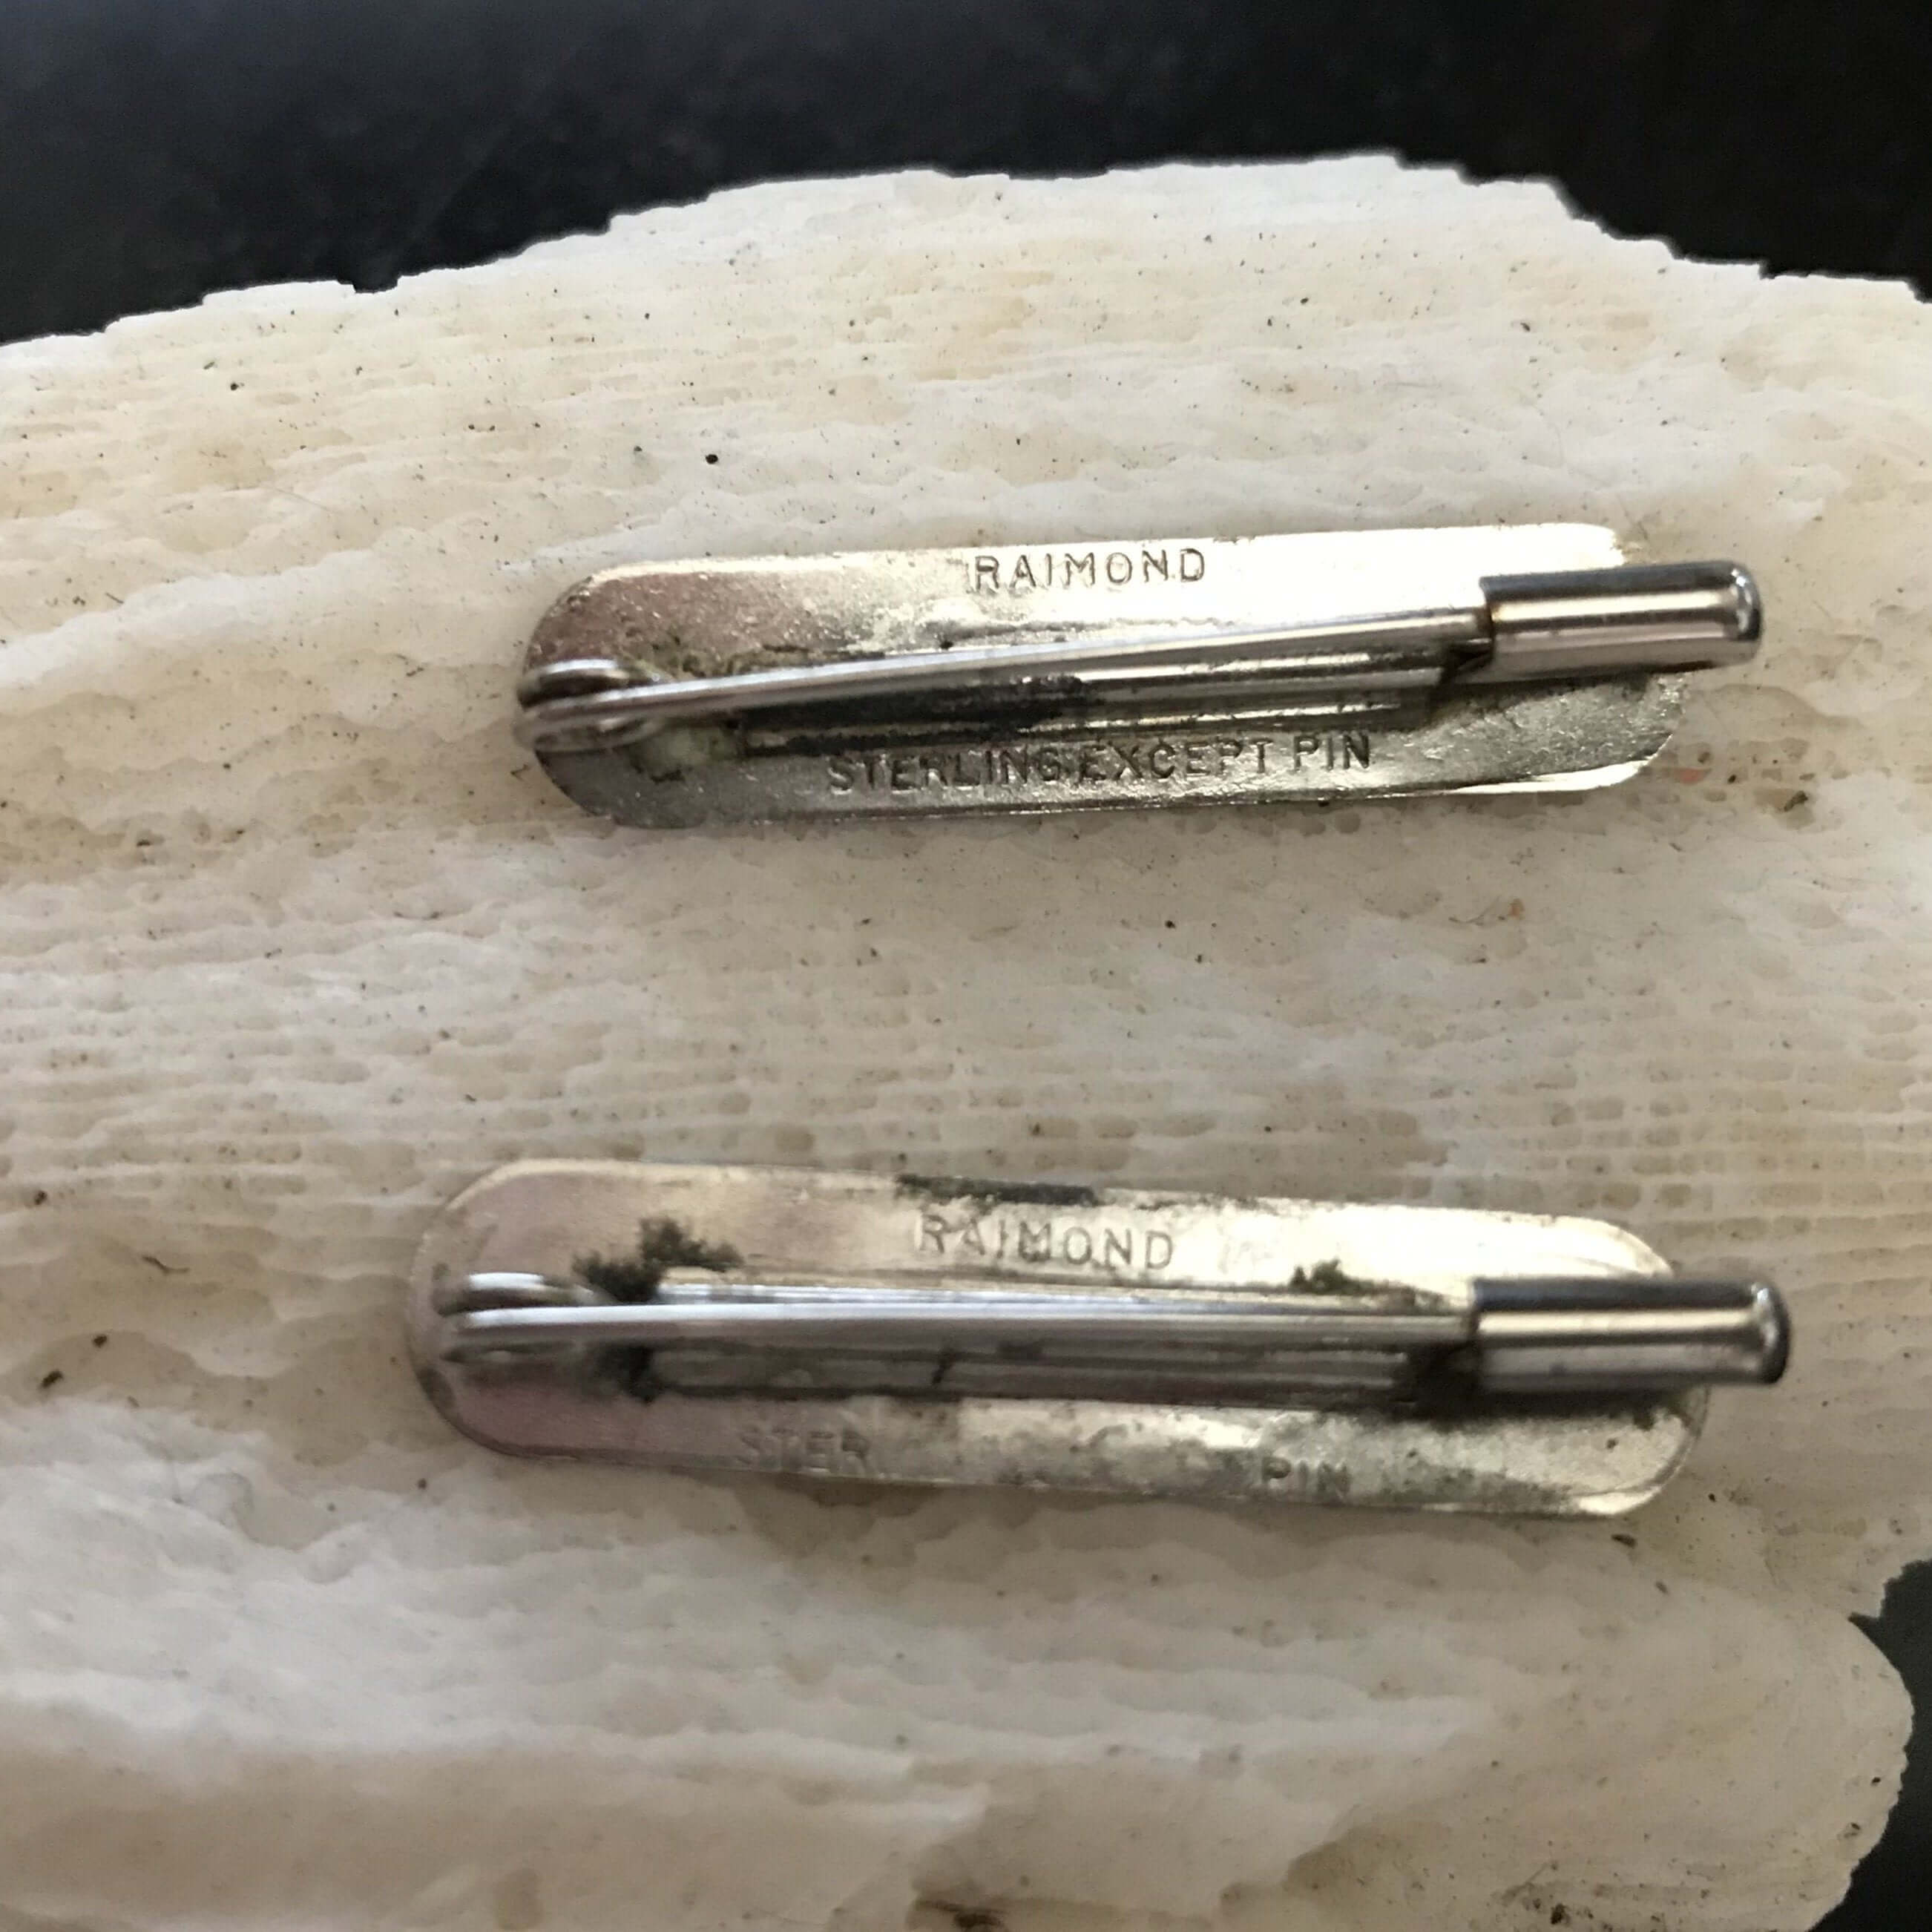 Pair of Raimond Vintage 1950's Sterling Silver Collar Pins - Shop Thrifty Treasures